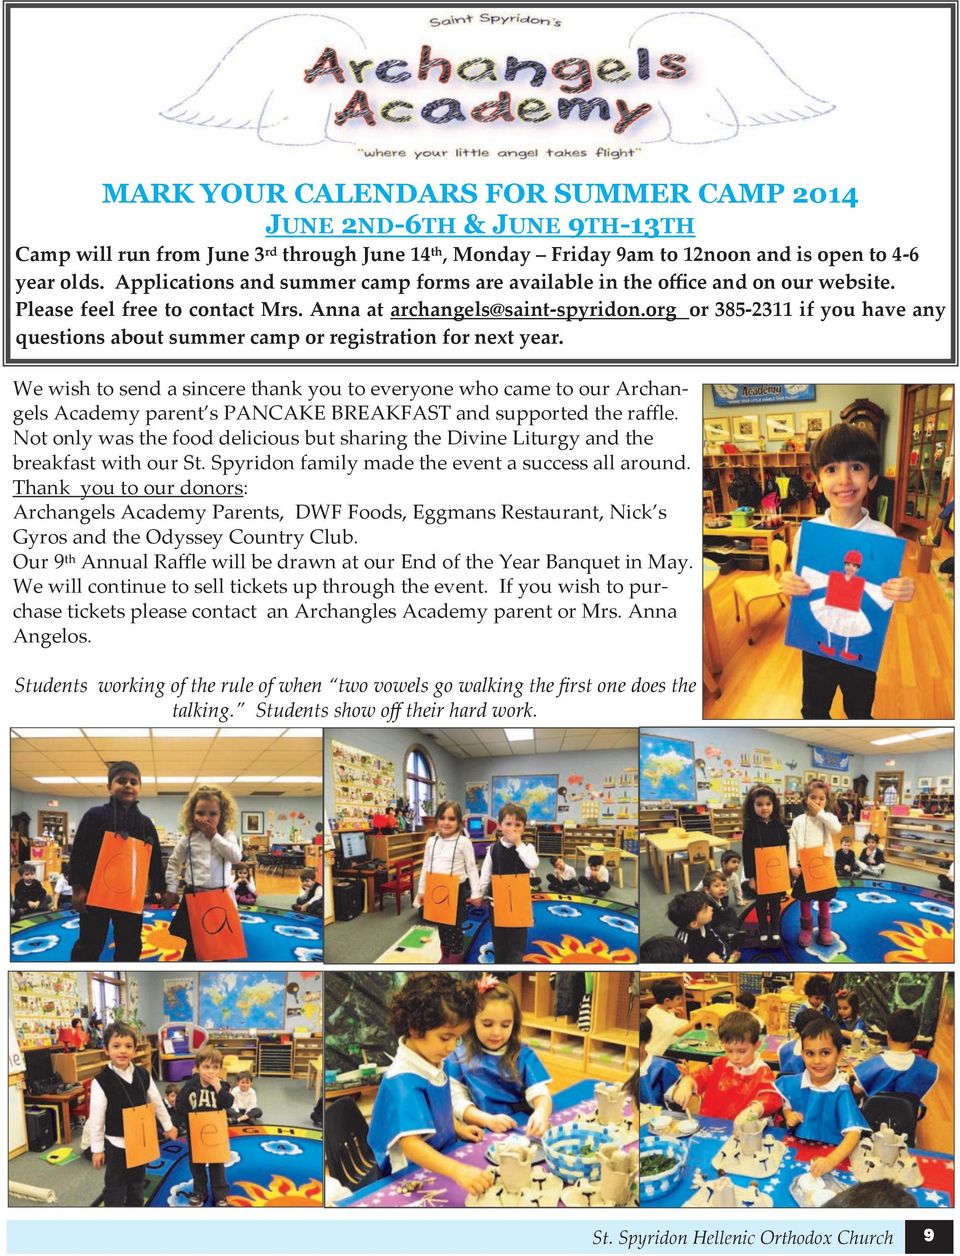 org or 385-2311 if you have any questions about summer camp or registration for next year.